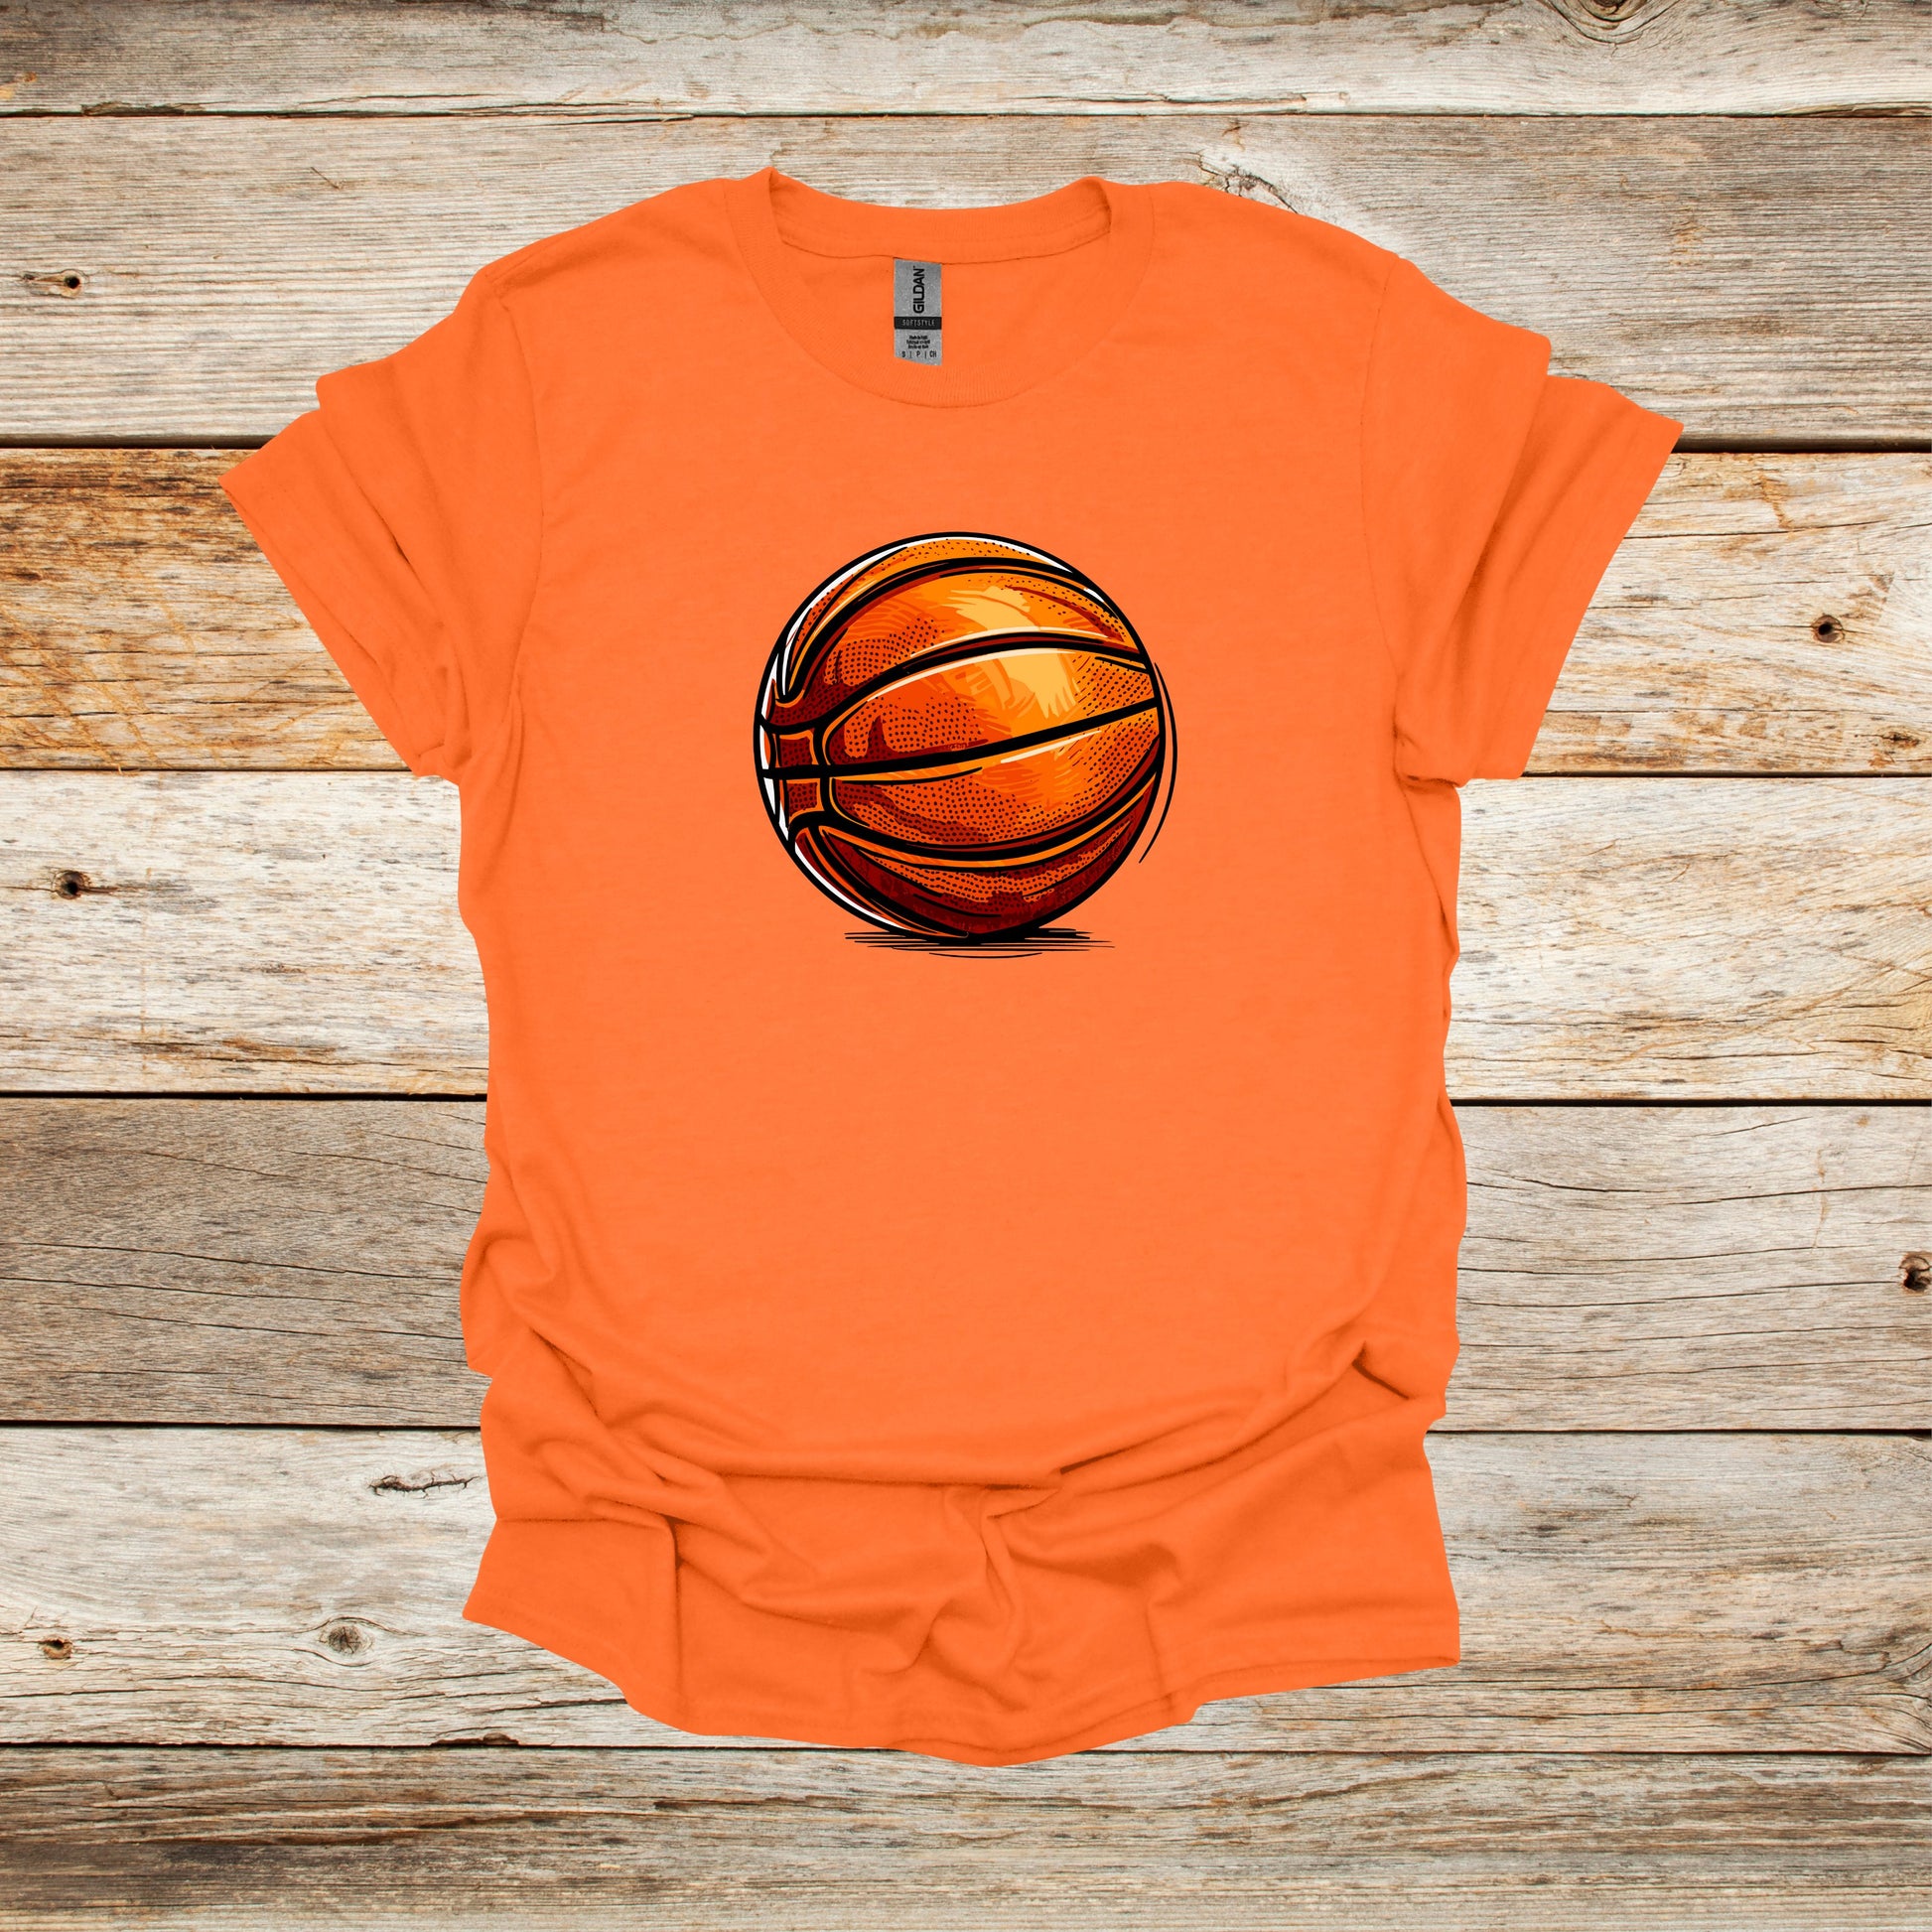 Basketball T-Shirt - Adult and Children's Tee Shirts - Sports T-Shirts Graphic Avenue Orange Adult Small 